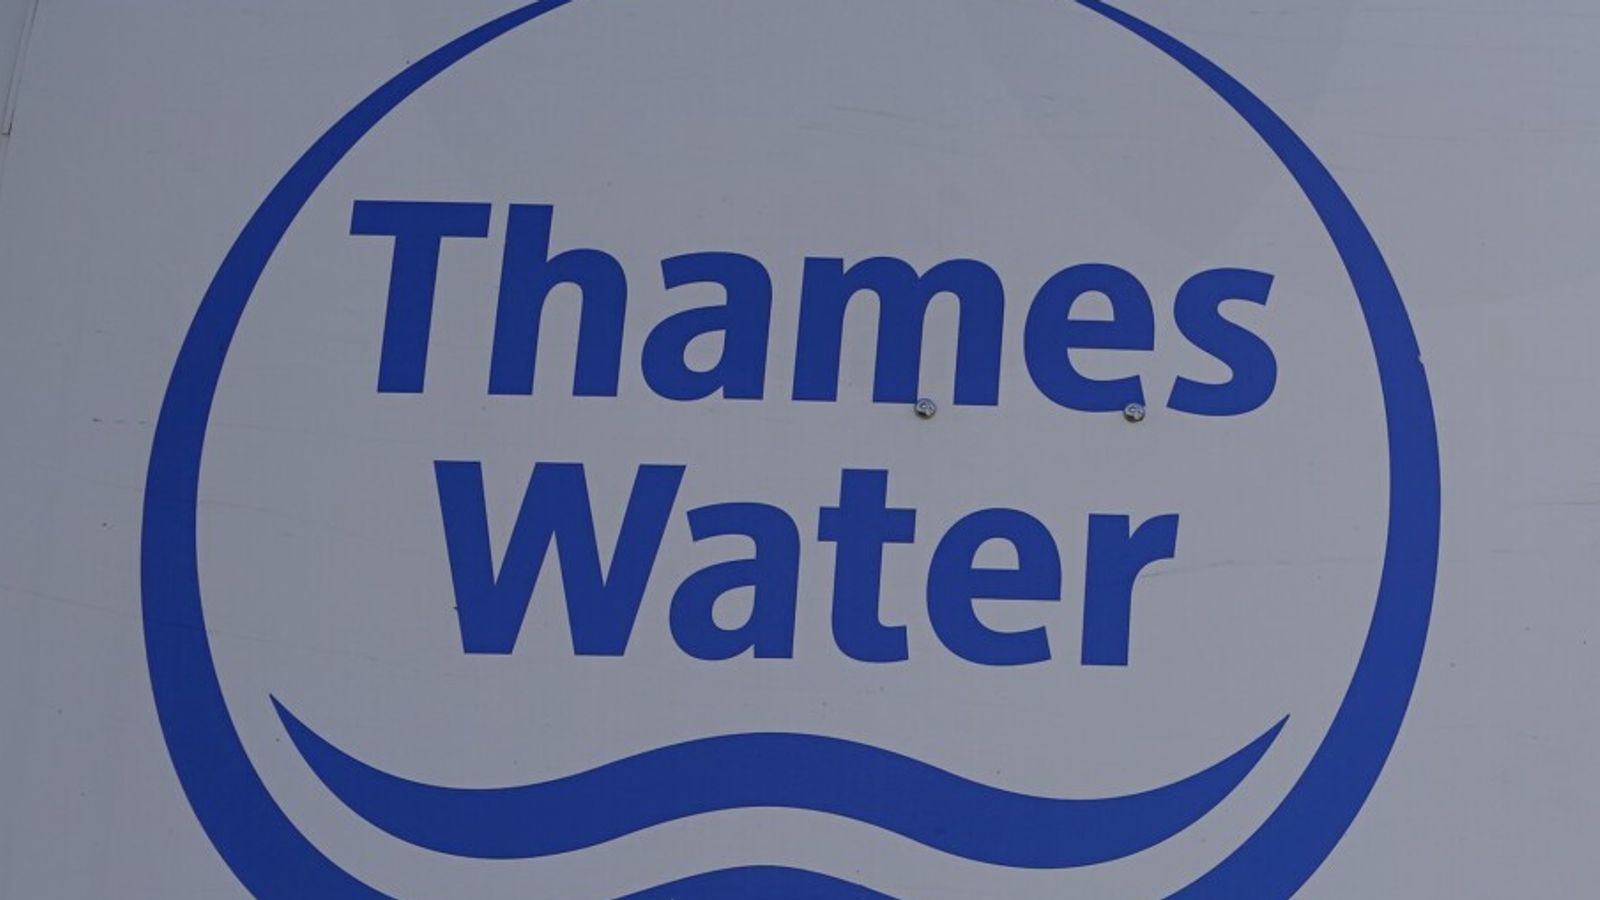 Government 'prepared for range of scenarios' amid fears of Thames Water collapse